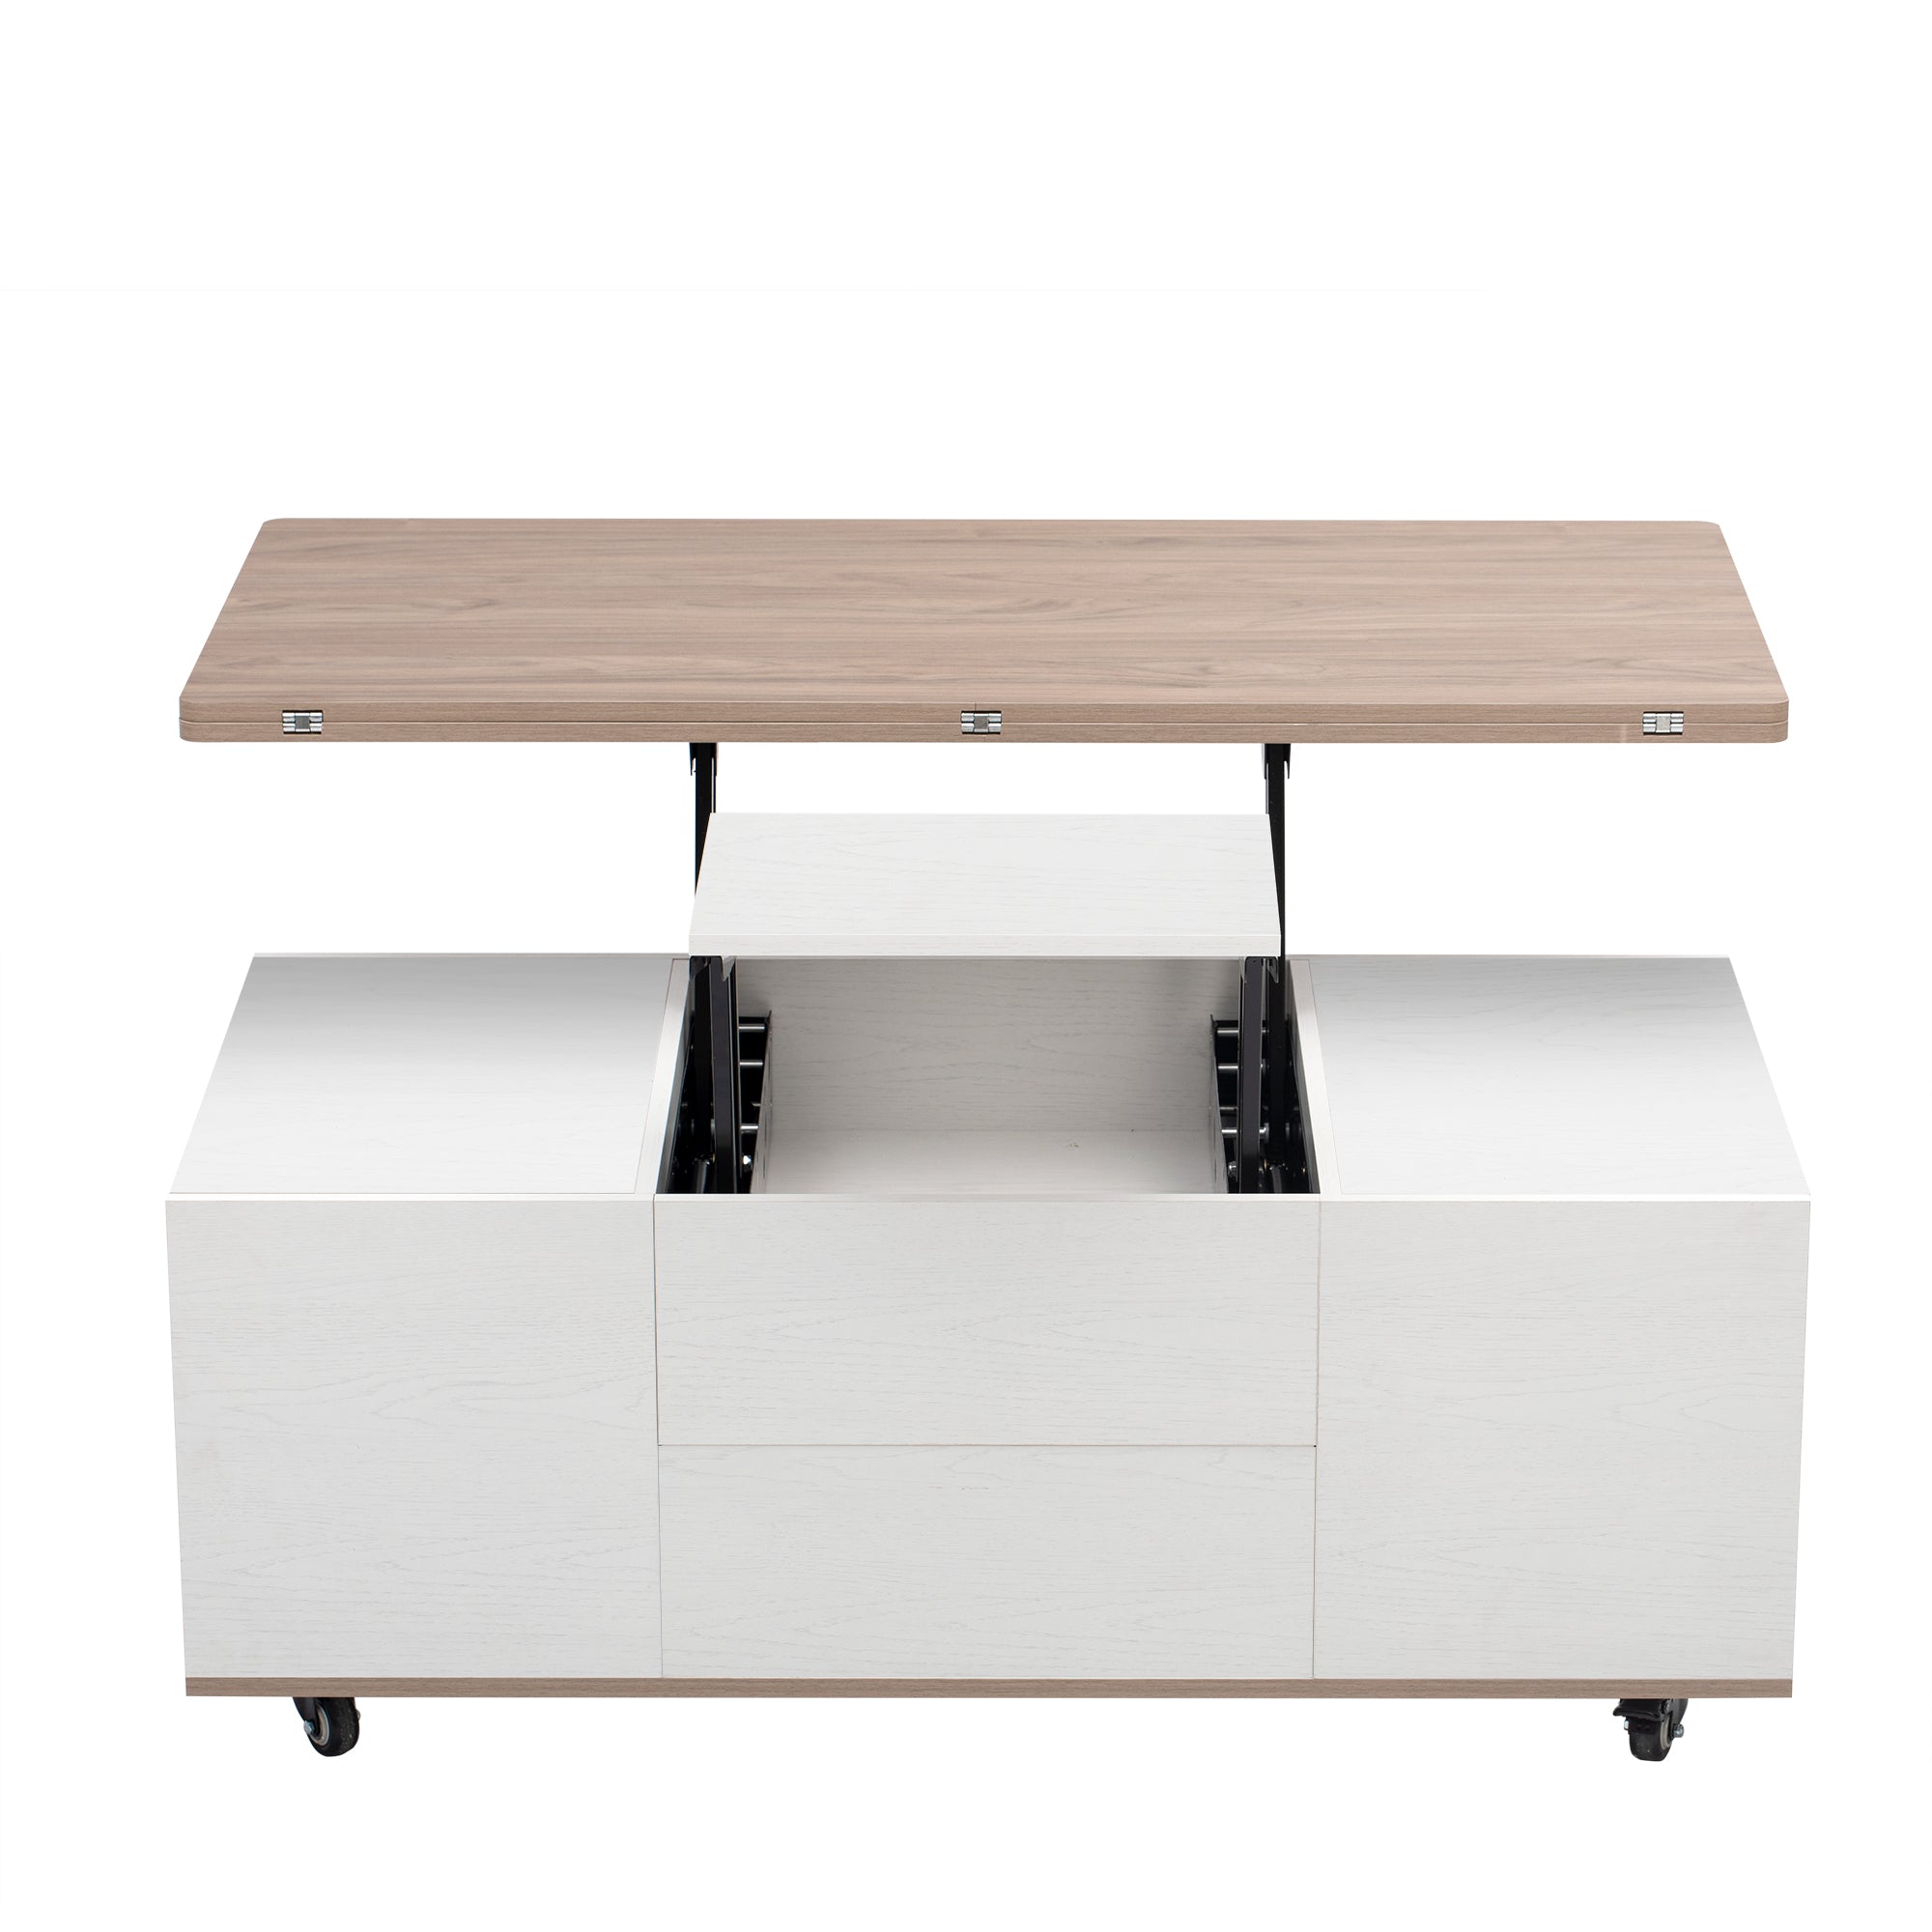 Bellemave 47.24" Modern Walnut & White Lift Top Coffee Table Multifunctional Table with Drawers & Shelves